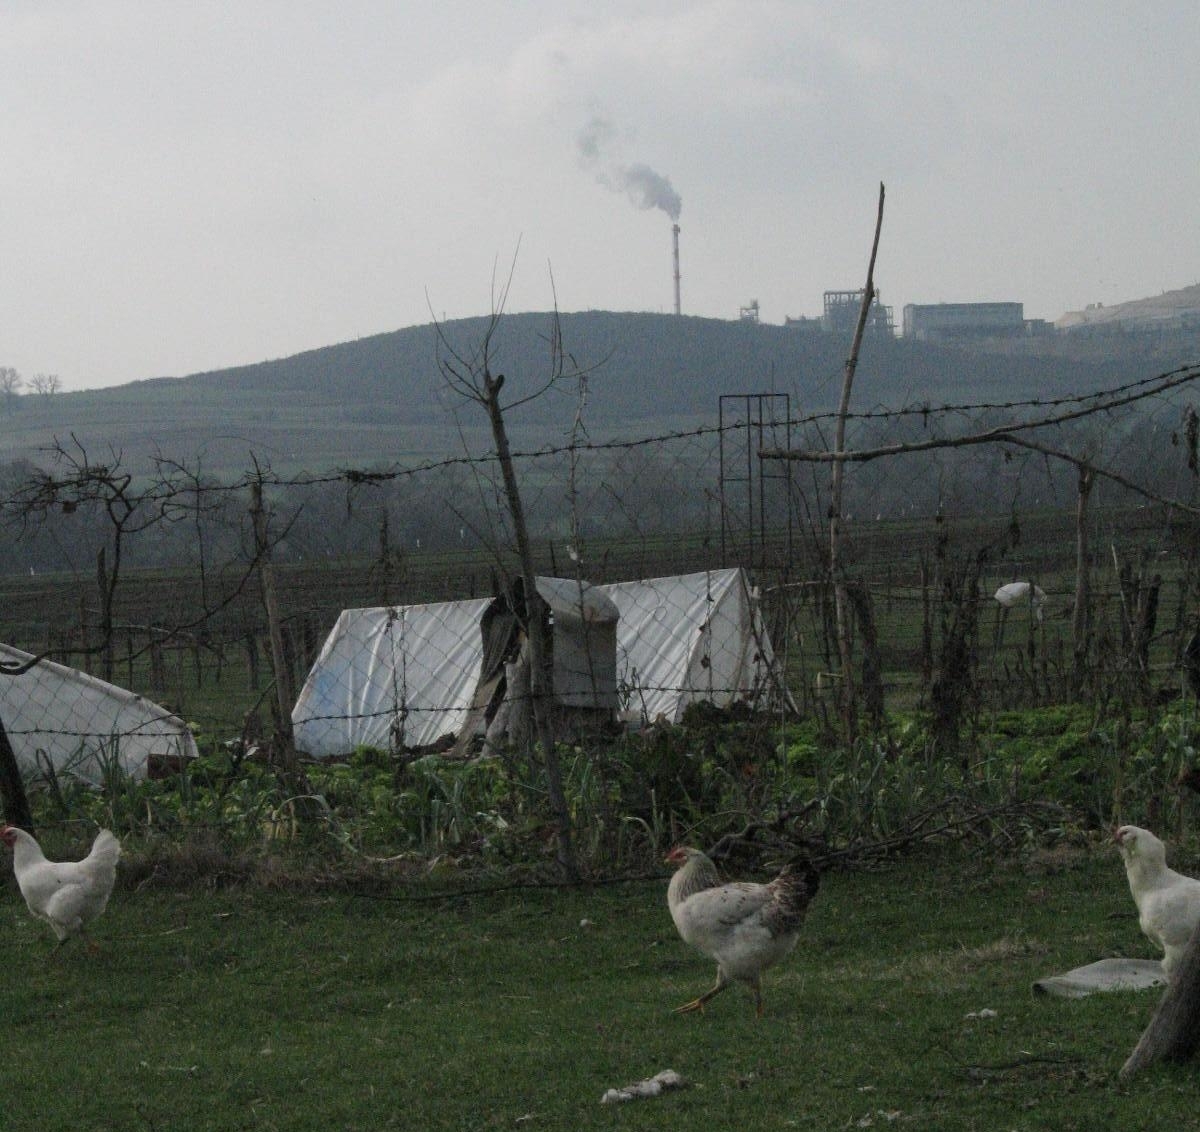 Chickens in Turkey with smokestack in background